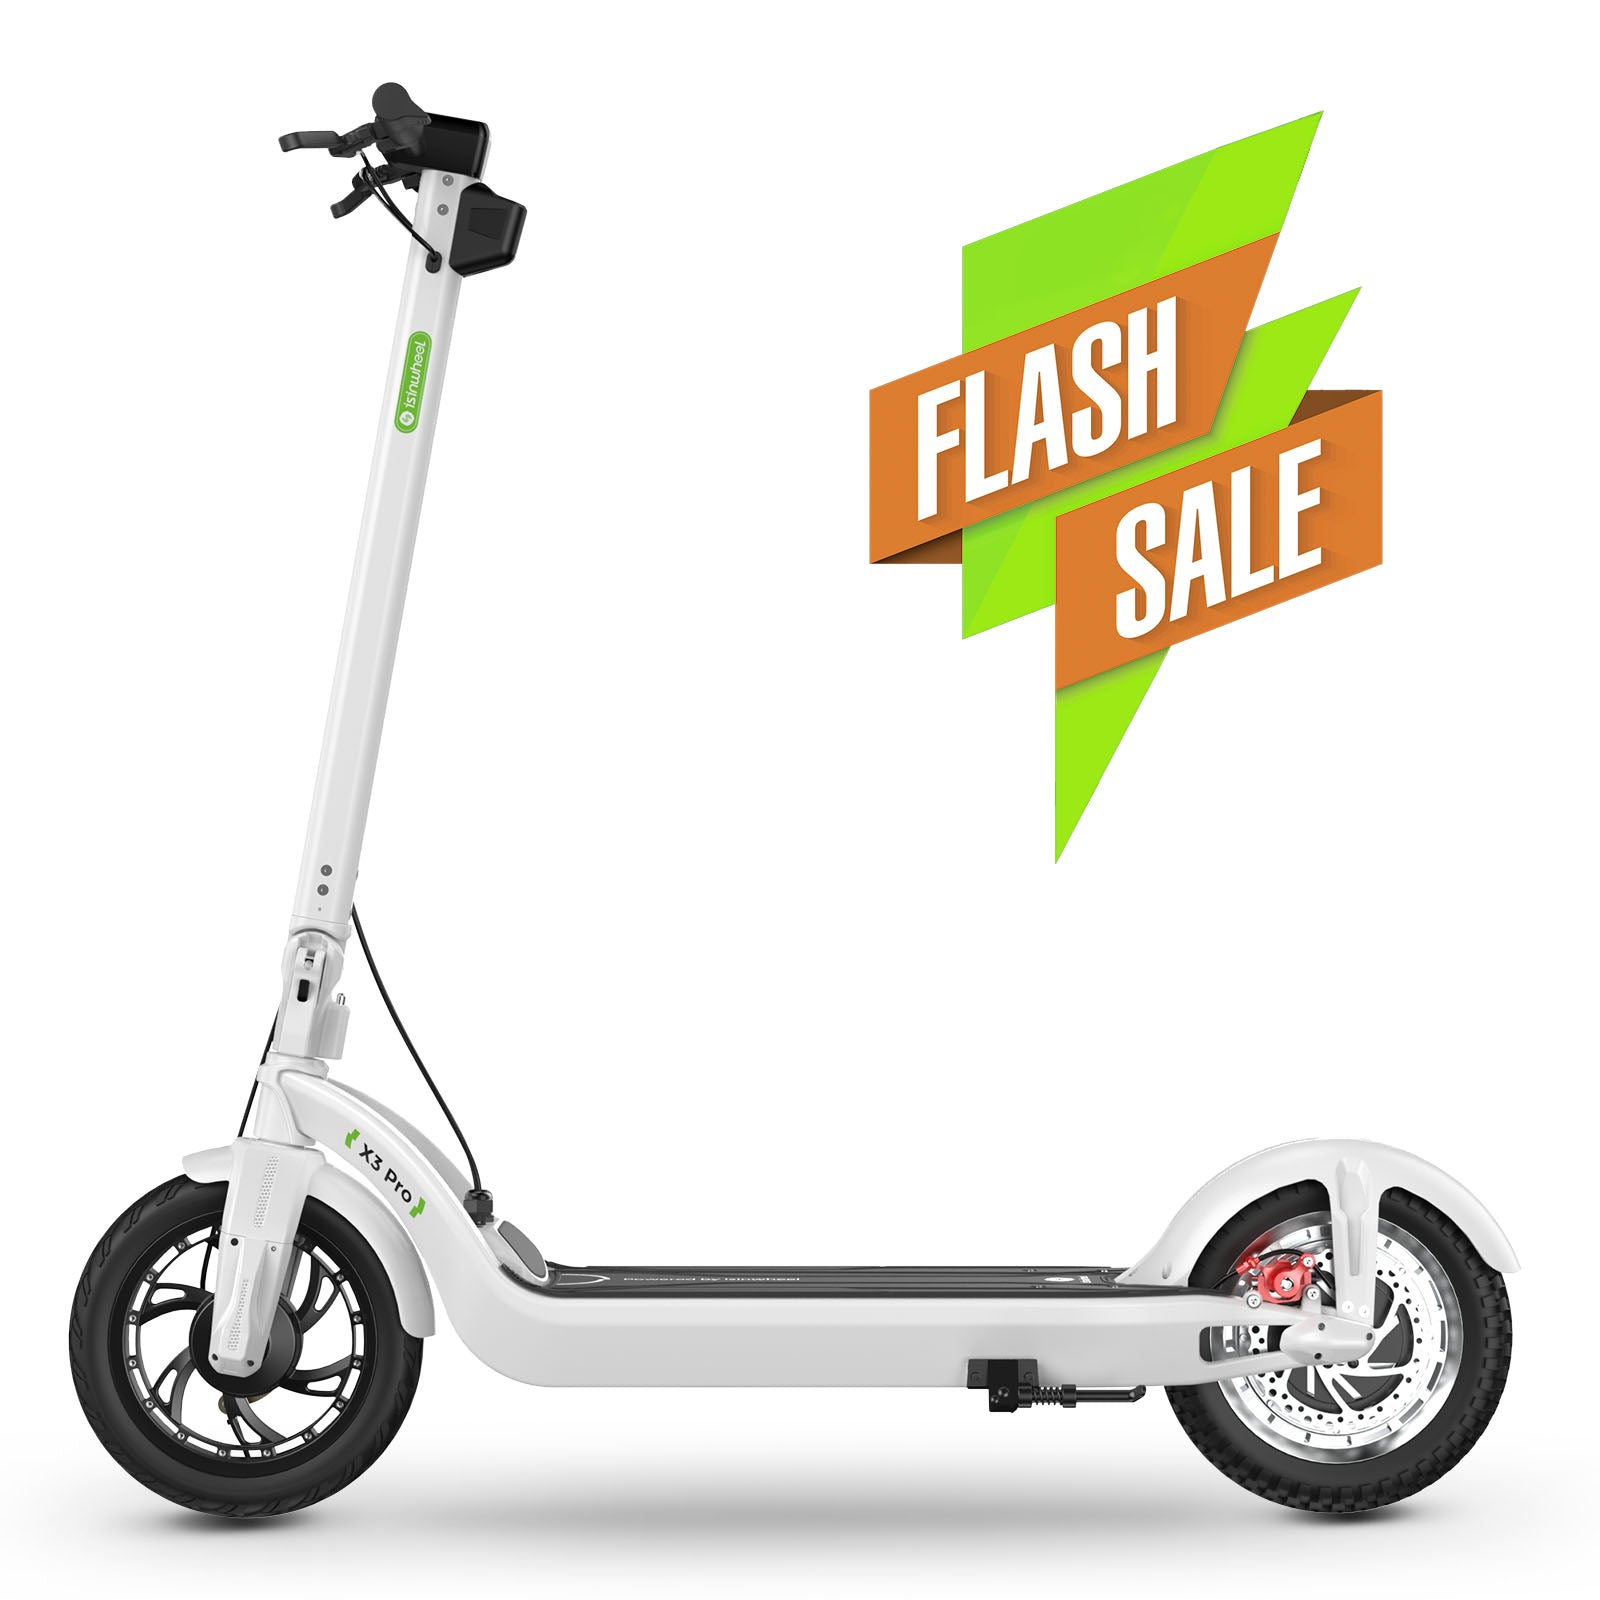 X3Pro 1200W Commuting Electric Scooter,12-inch Fat Tire,Maximum Load 400lbs